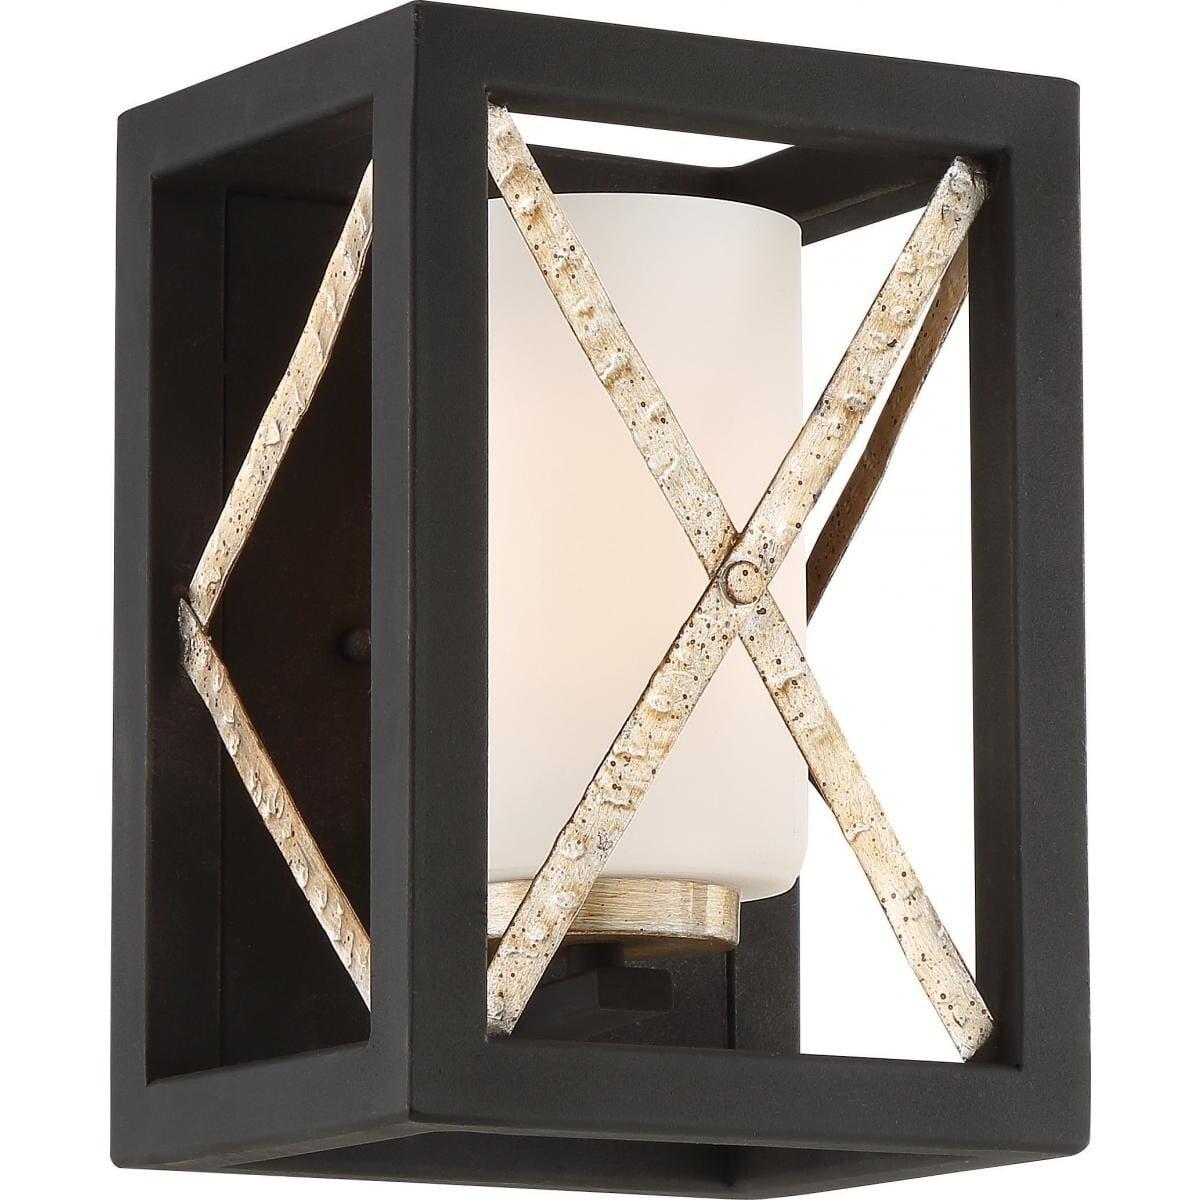 Boxer Matte Black and Antique Silver Cylinder Wall Sconce